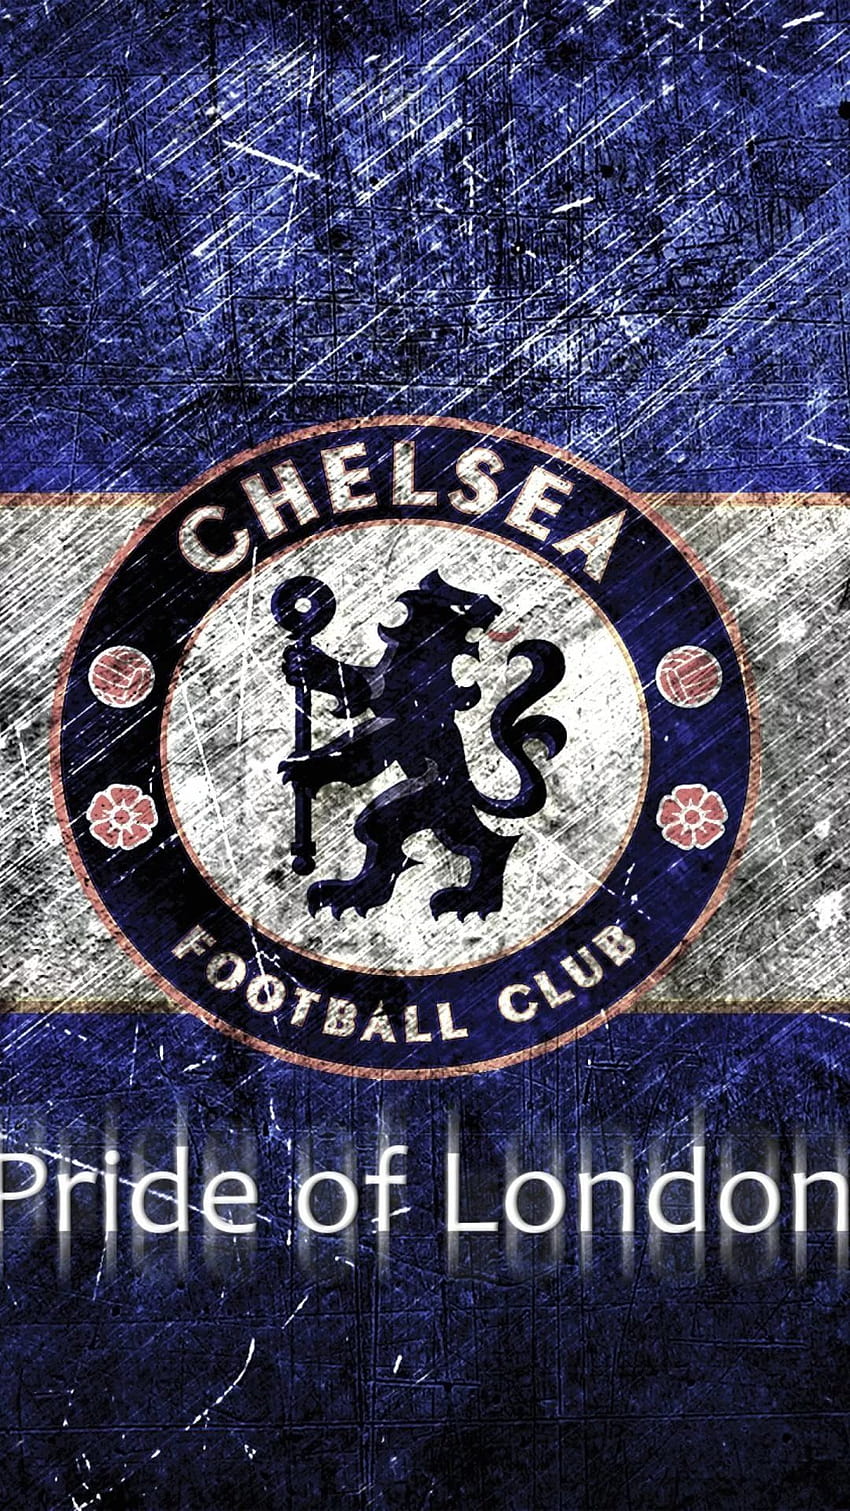 Chelsea Fc Android, chelsea android HD phone wallpaper